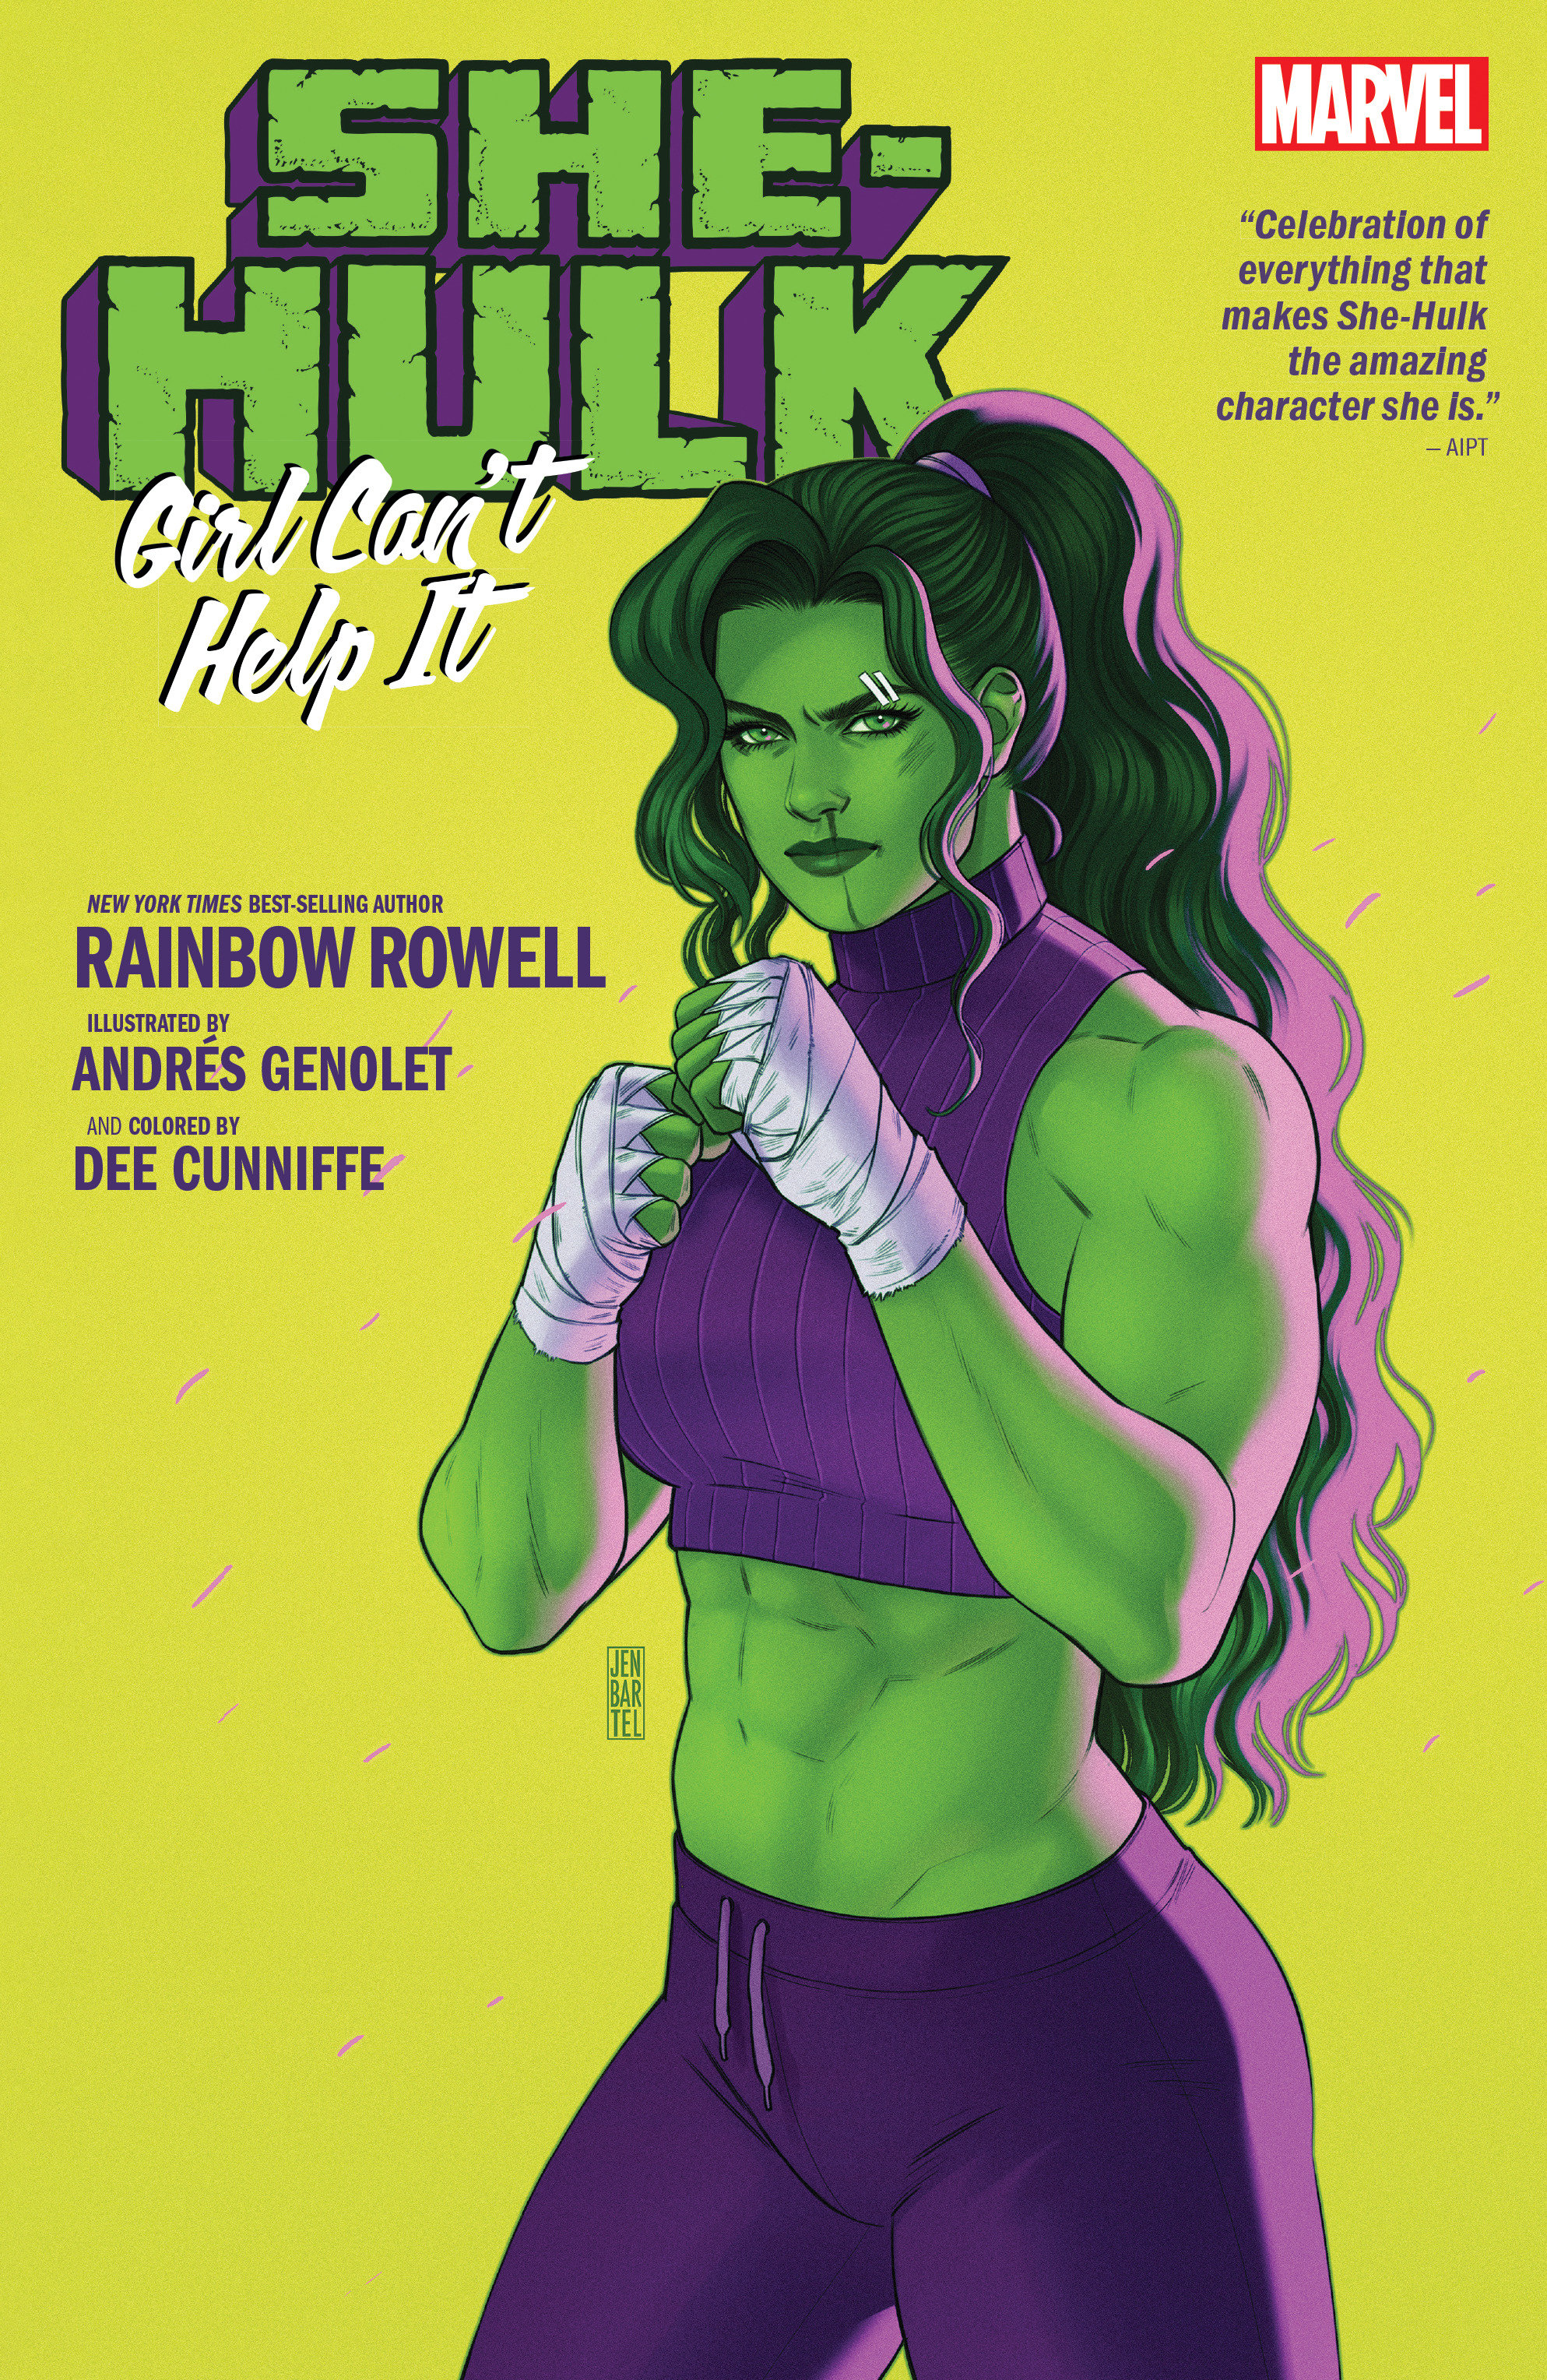 She-Hulk by Rainbow Rowell Graphic Novel Volume 3 Girl Can't Help It